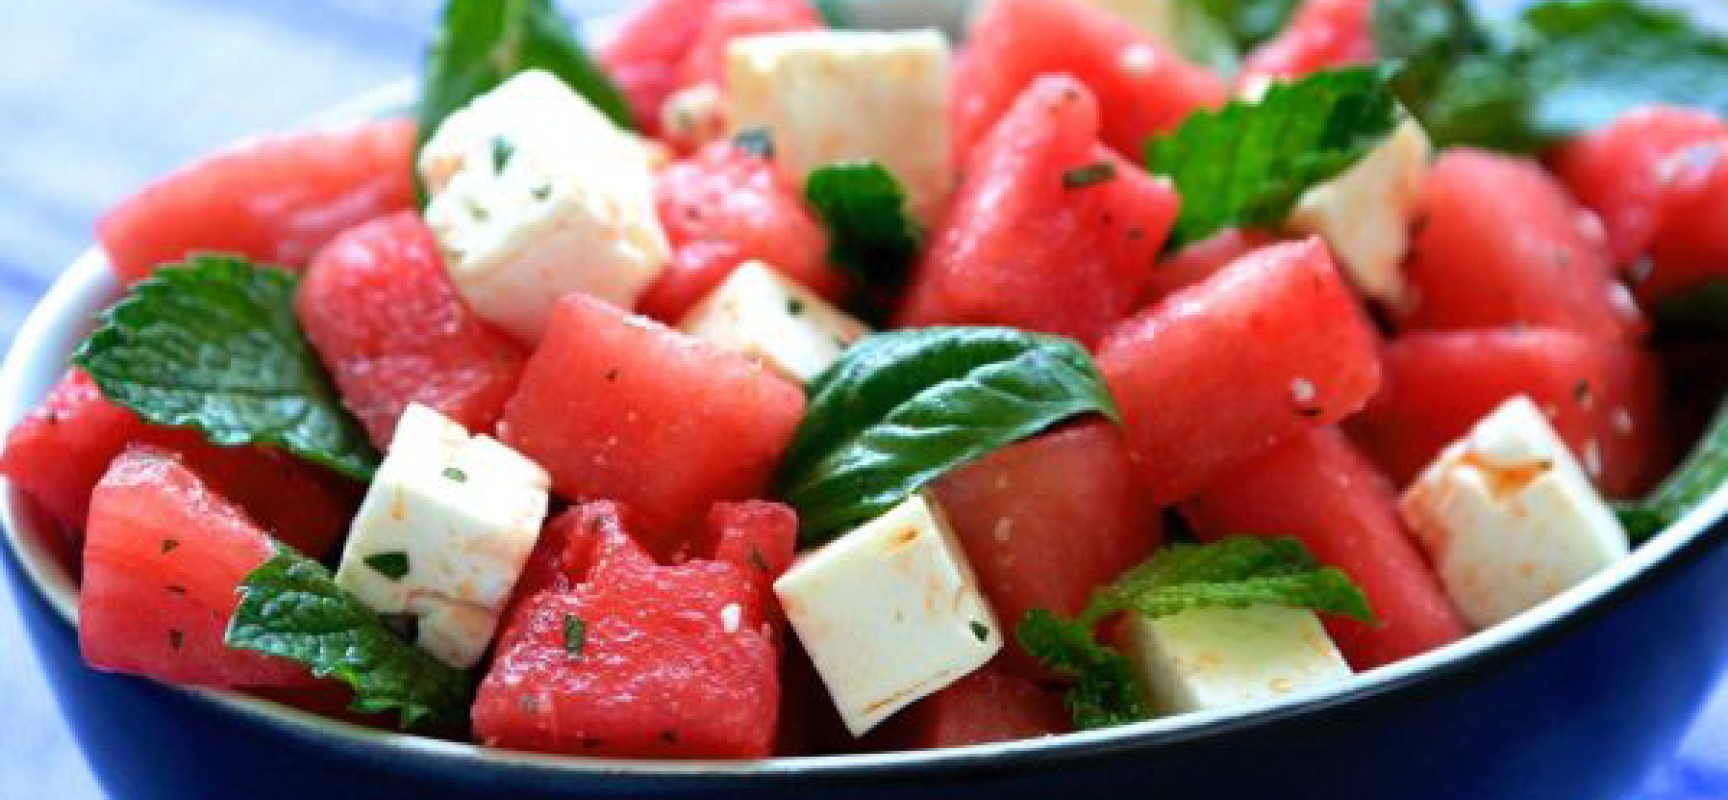 Summer Specials: Sweet And Spicy Watermelon Recipes